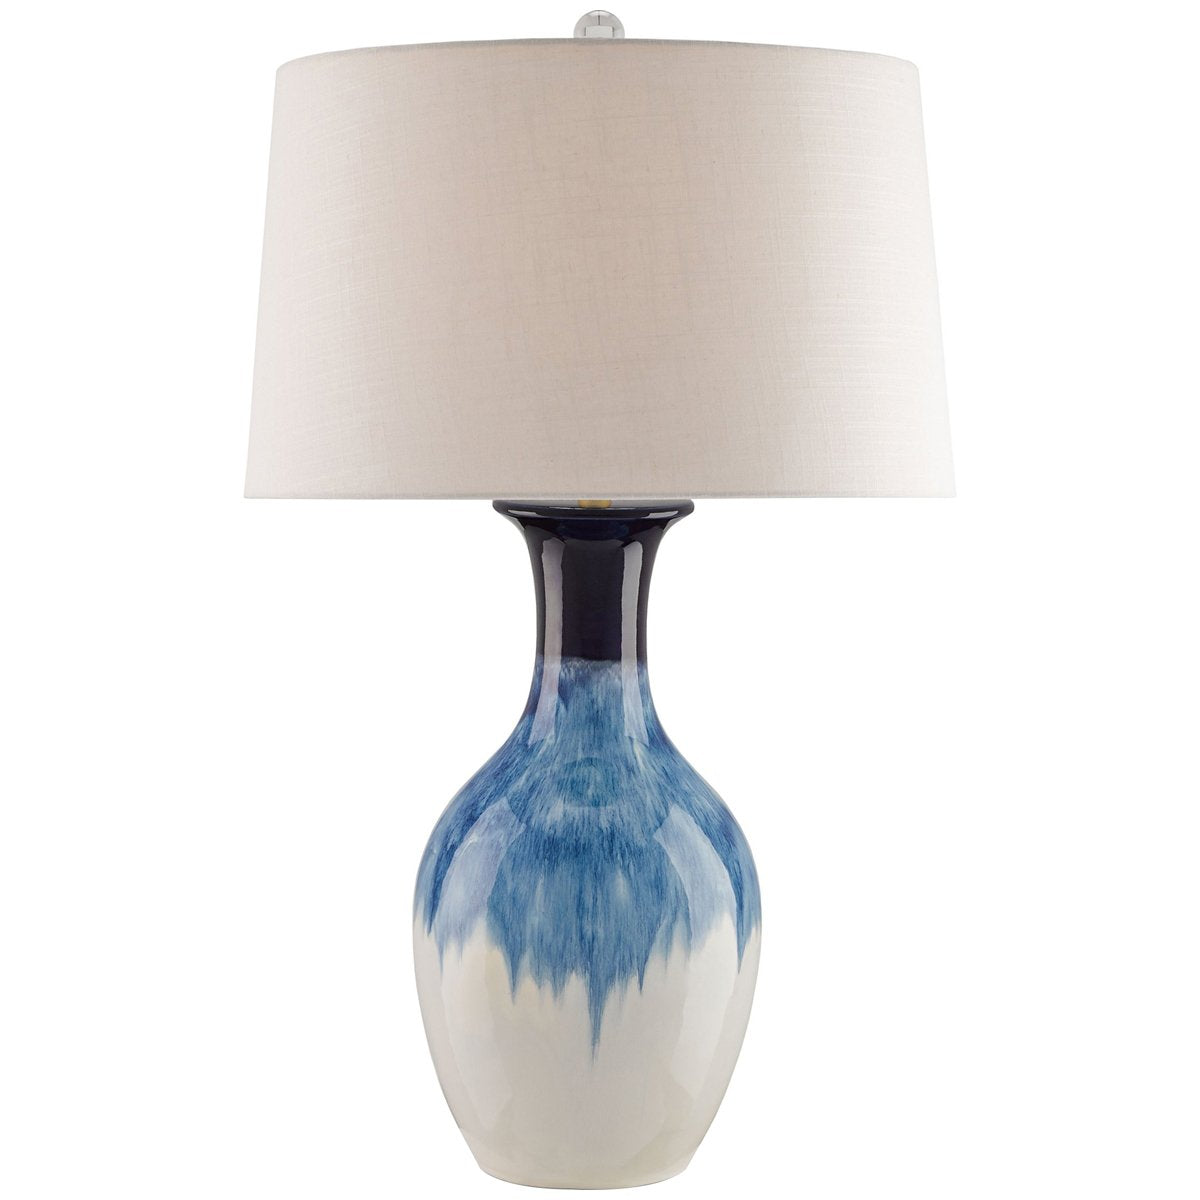 Currey and Company Fete Table Lamp